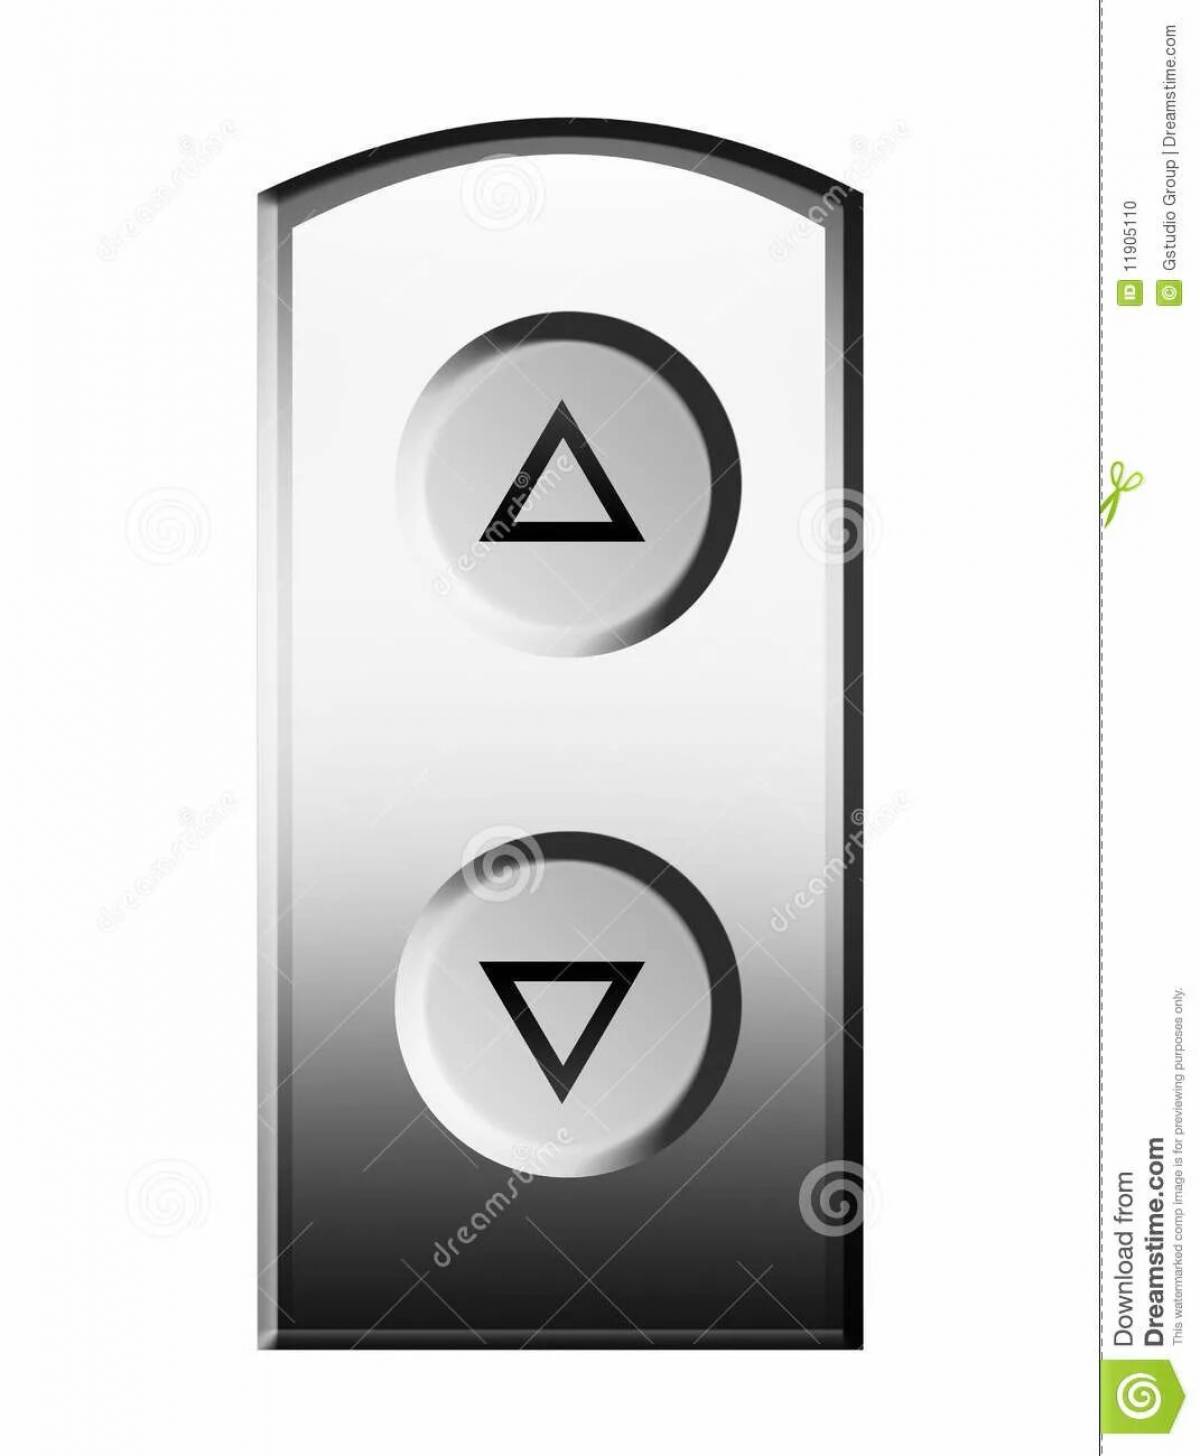 Elevator buttons #16